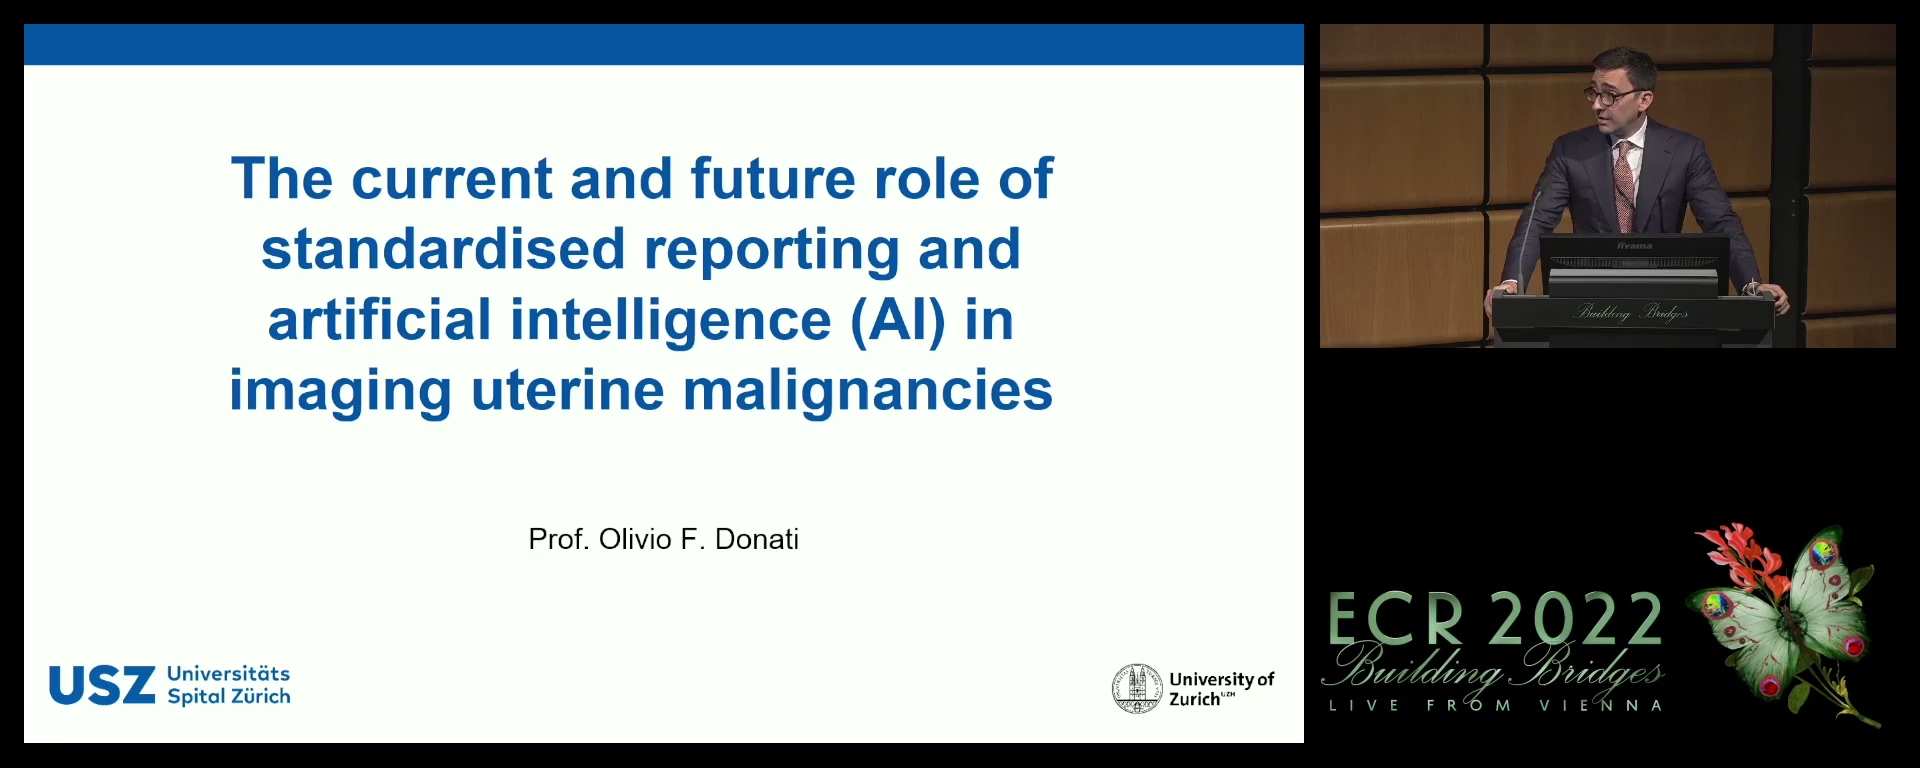 The current and future role of standardised reporting and artificial intelligence (AI) in imaging uterine malignancies